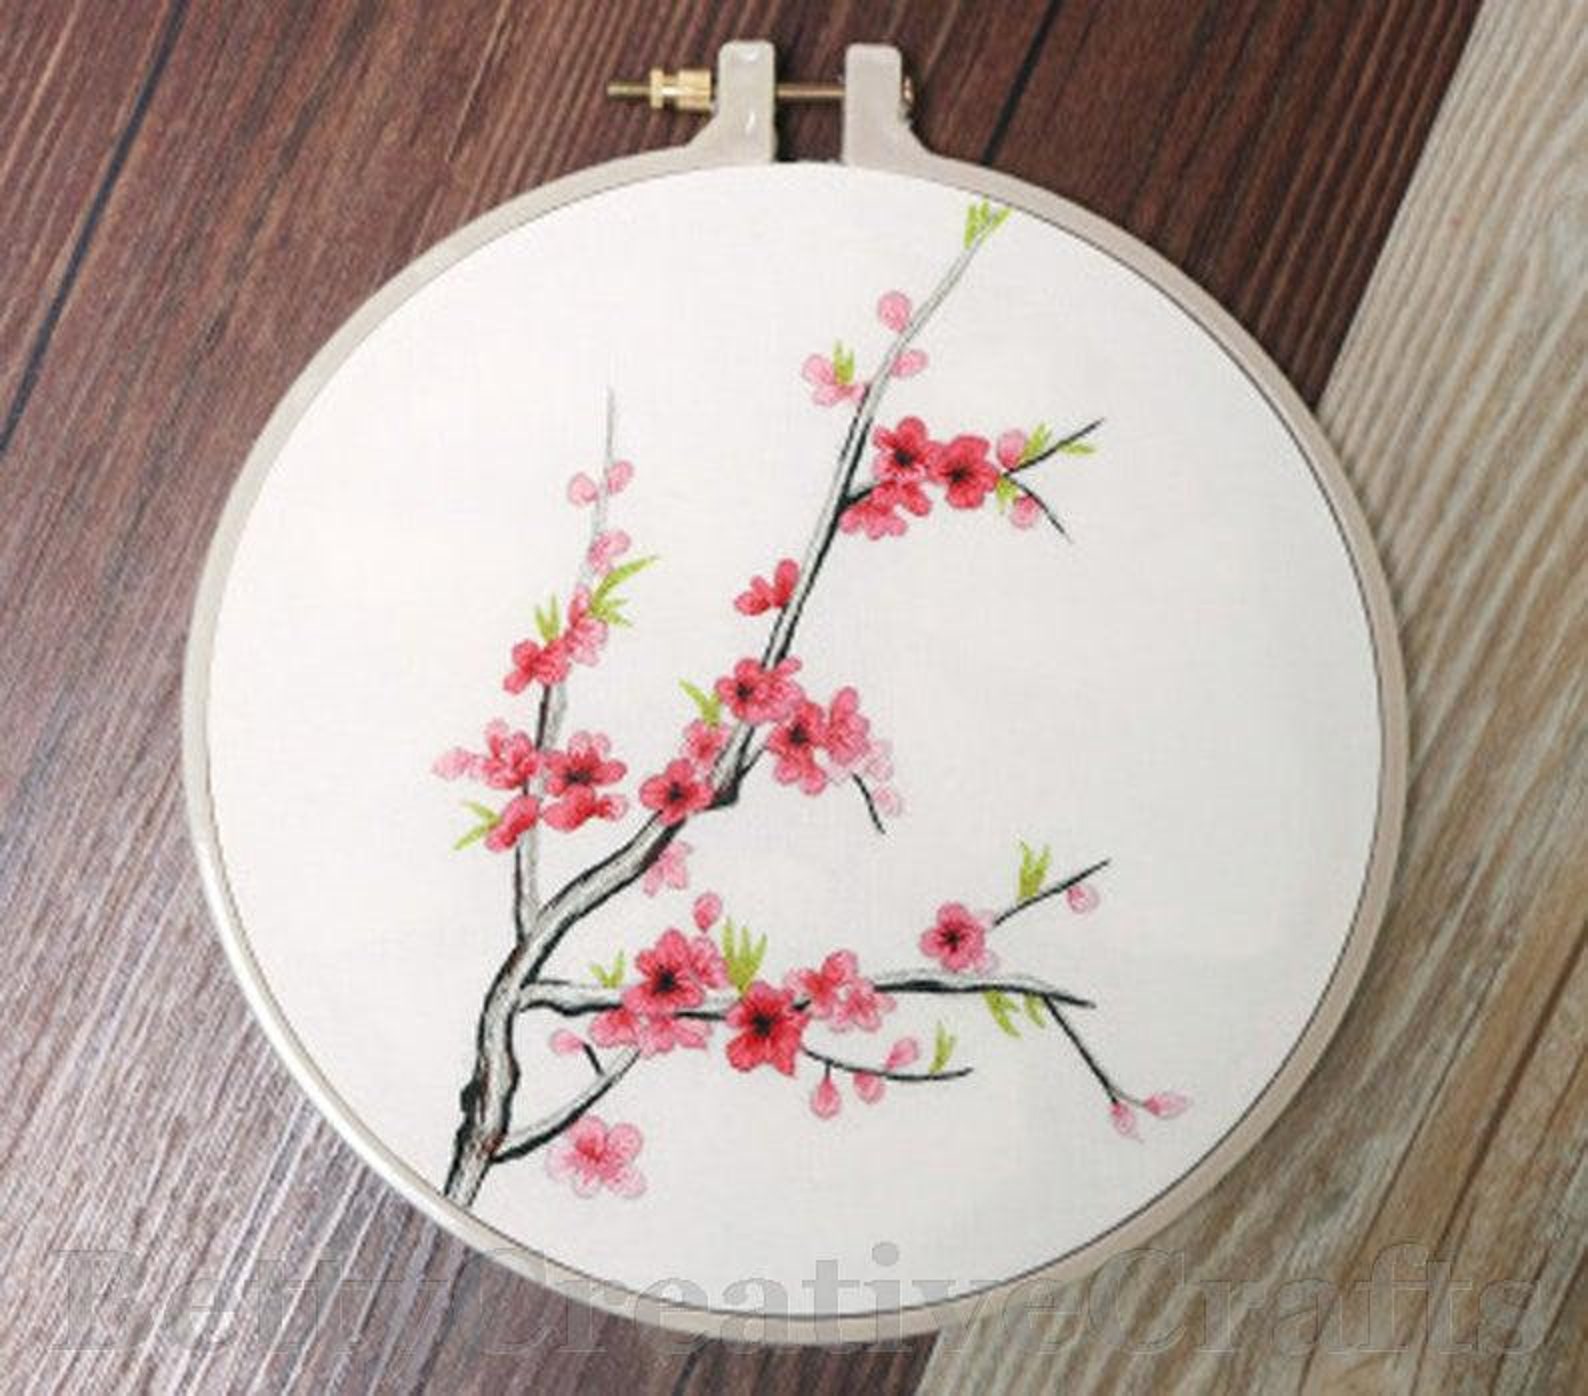 Embroidery Kit Beginner/ Cherry Blossom Floral Embroidery Kit - Etsy